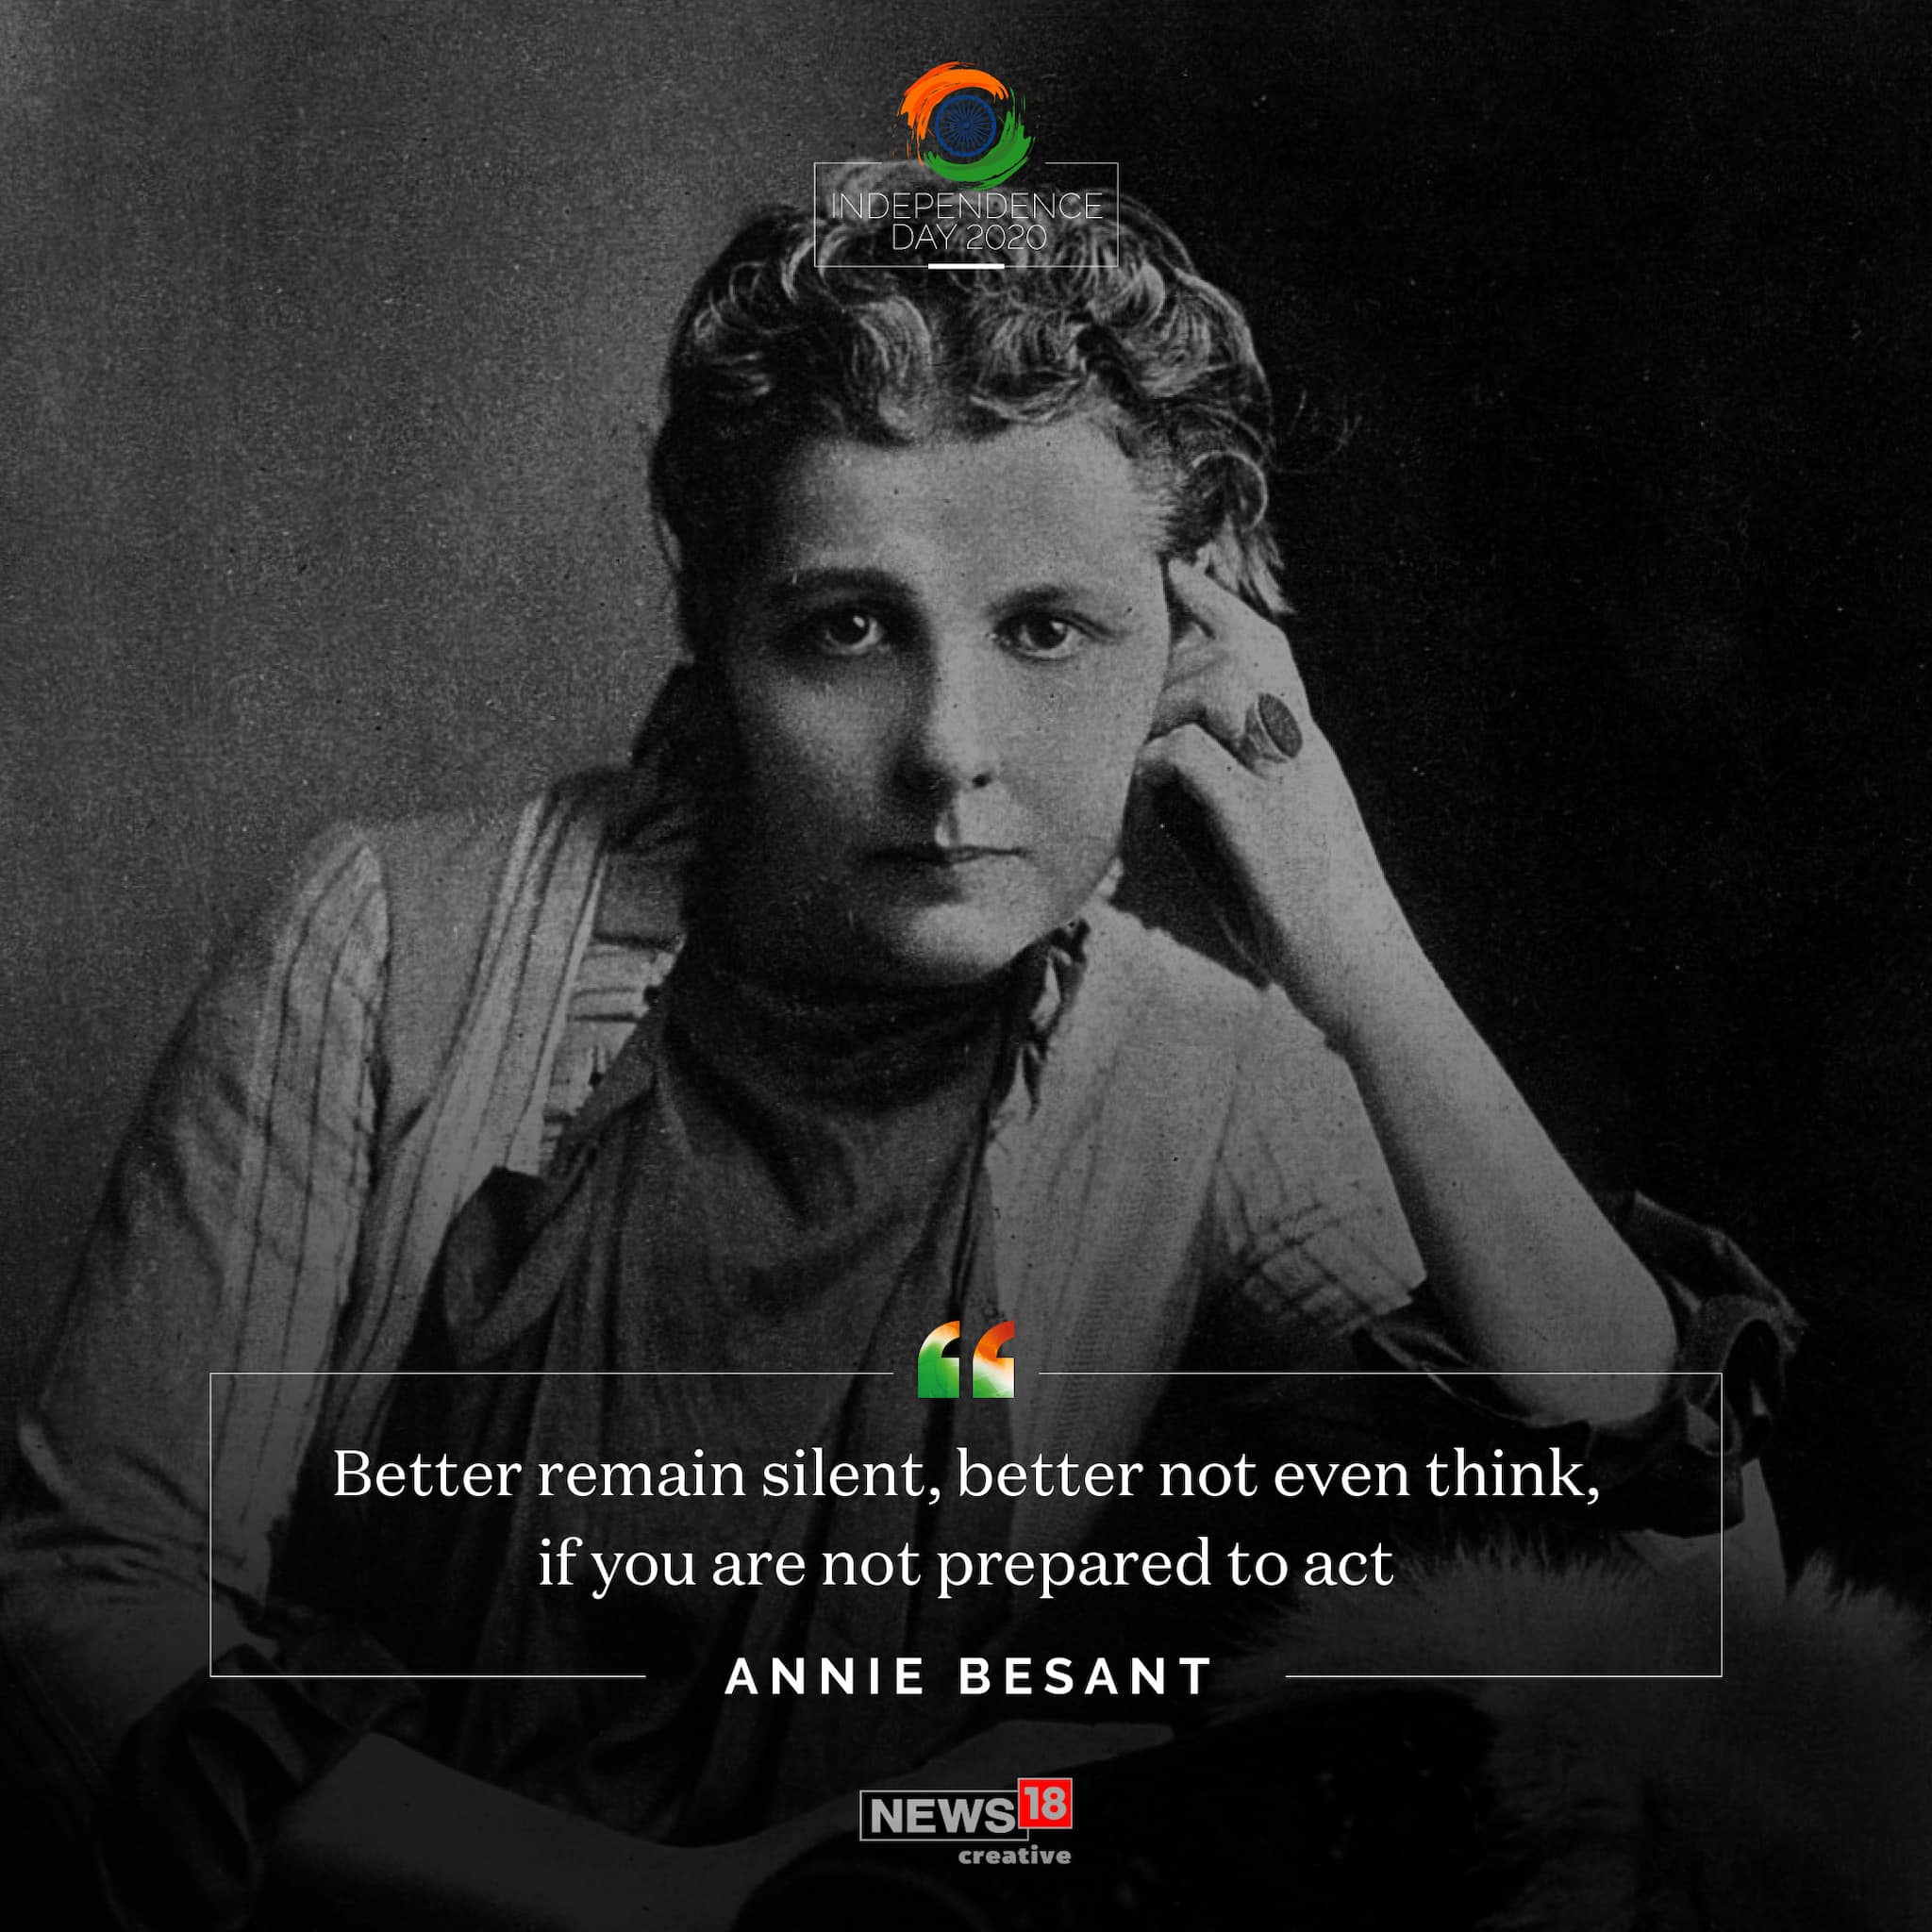 "Better remain silent, better not even think, if you are not prepared to act" quote by Annie Besant.